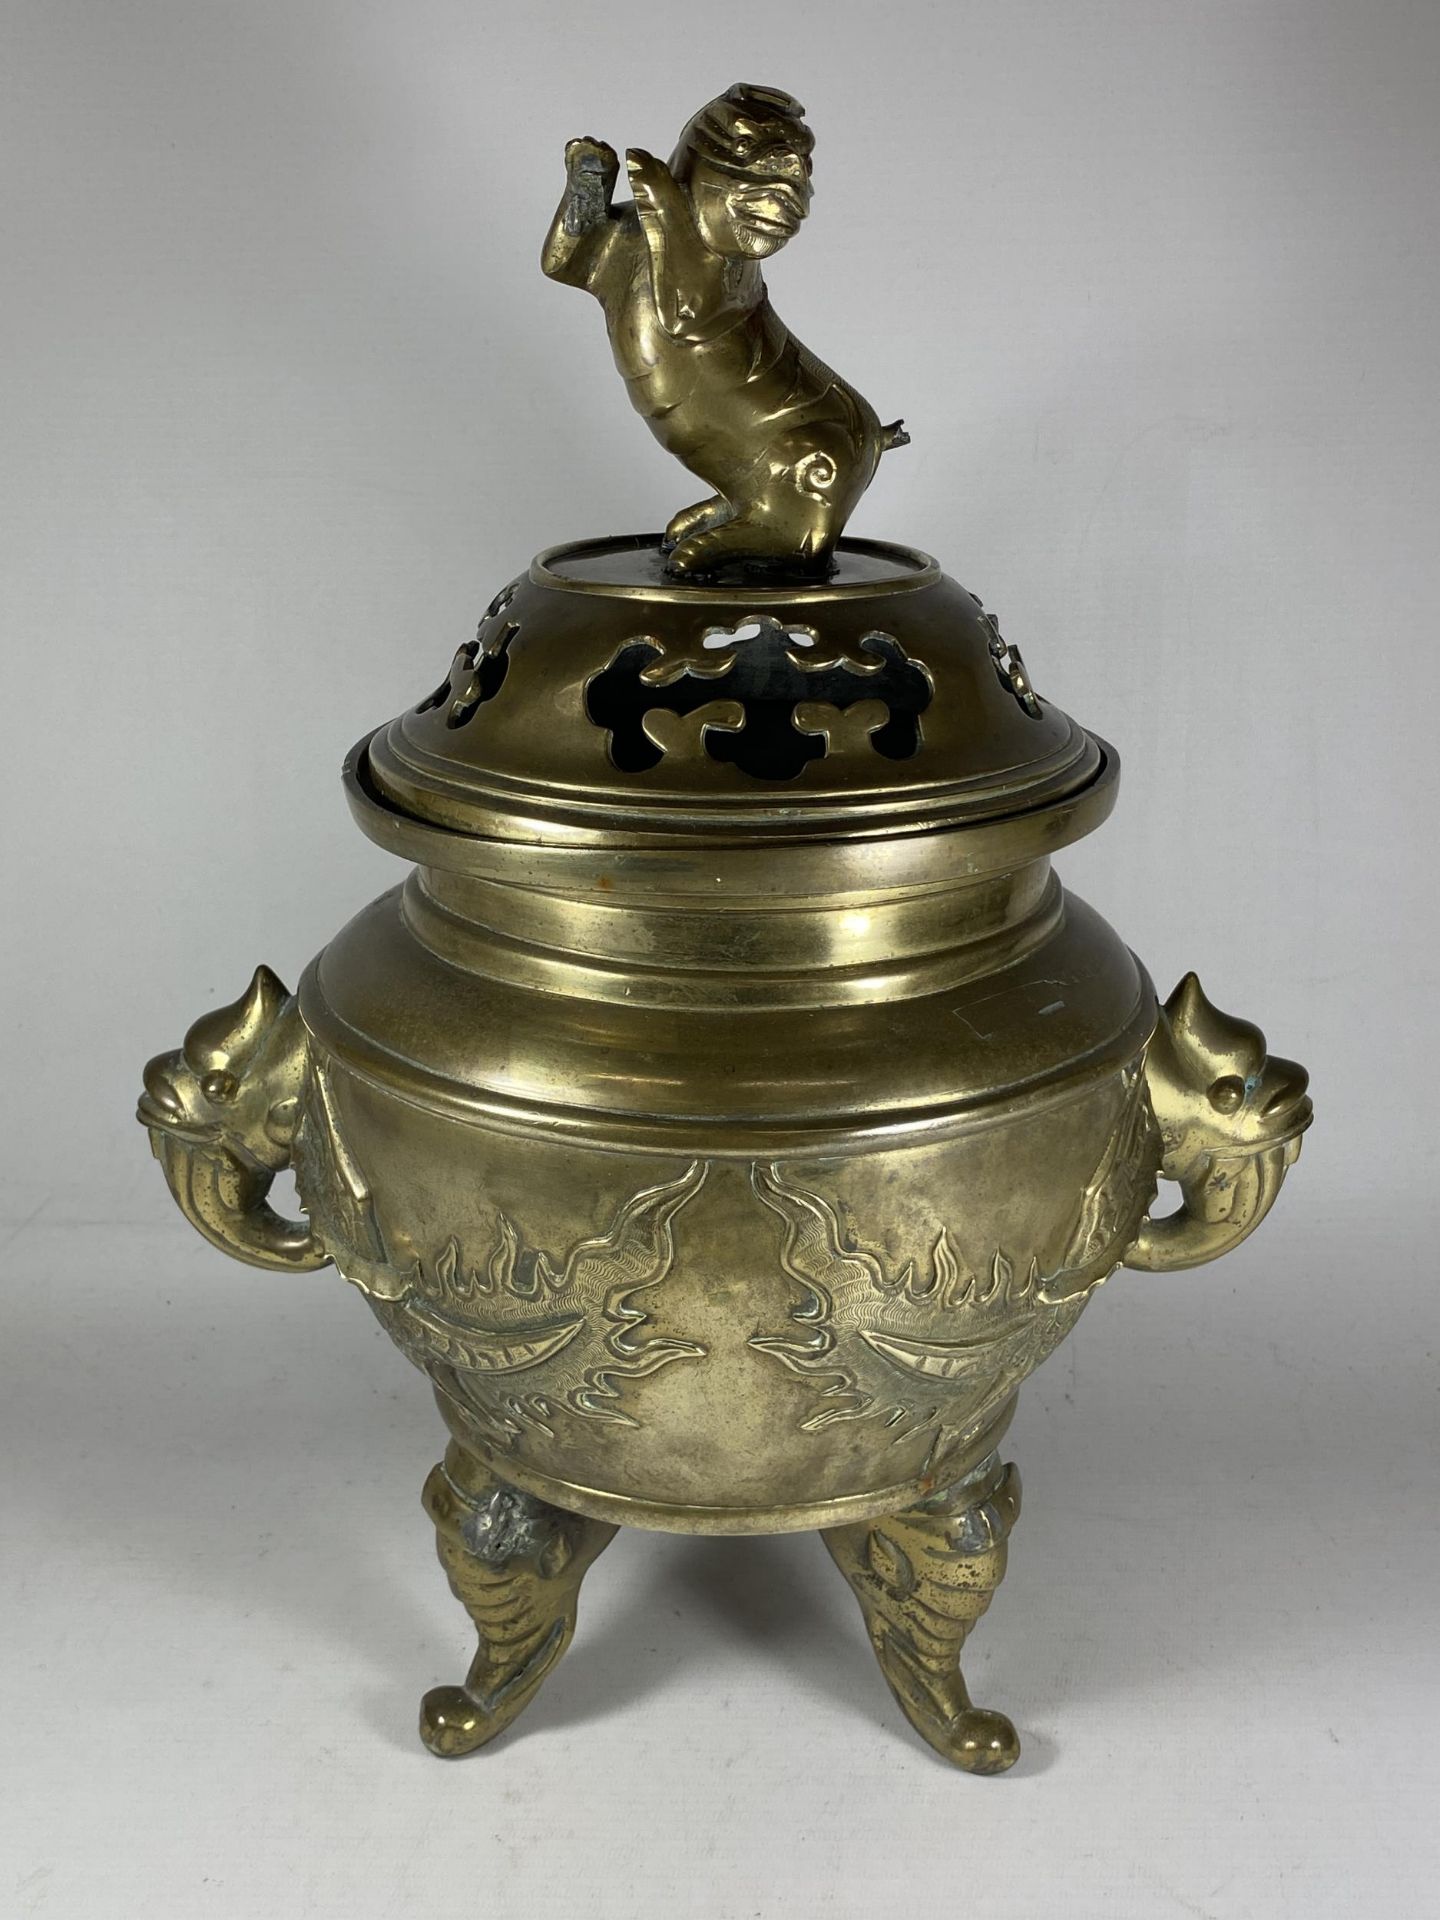 A LARGE CHINESE TWIN HANDLED BRASS LIDDED TEMPLE JAR, WITH DRAGONS CHASING THE FLAMING PEARL - Image 2 of 8